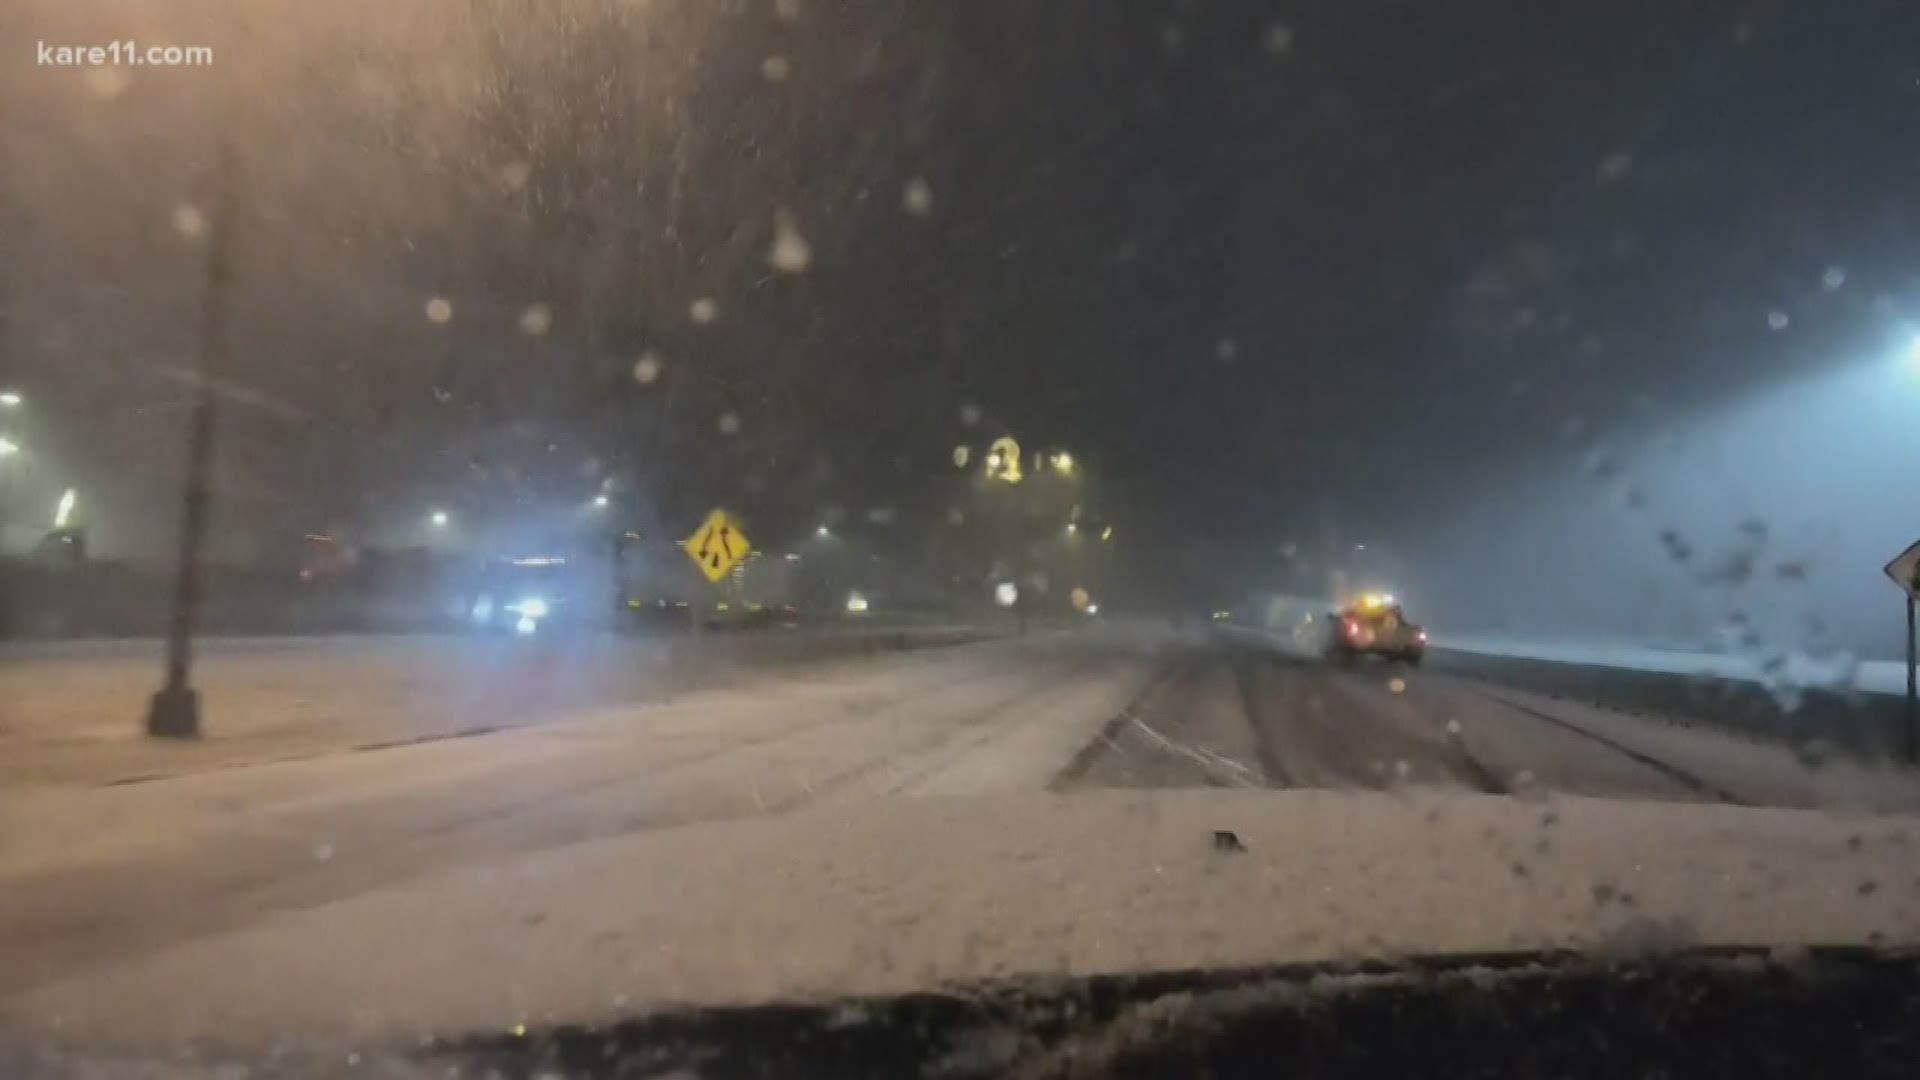 In southern Minnesota the snow started falling just after 6 p.m. and like it often does down here the wind is blowing hard making visibility on the roads a problem.